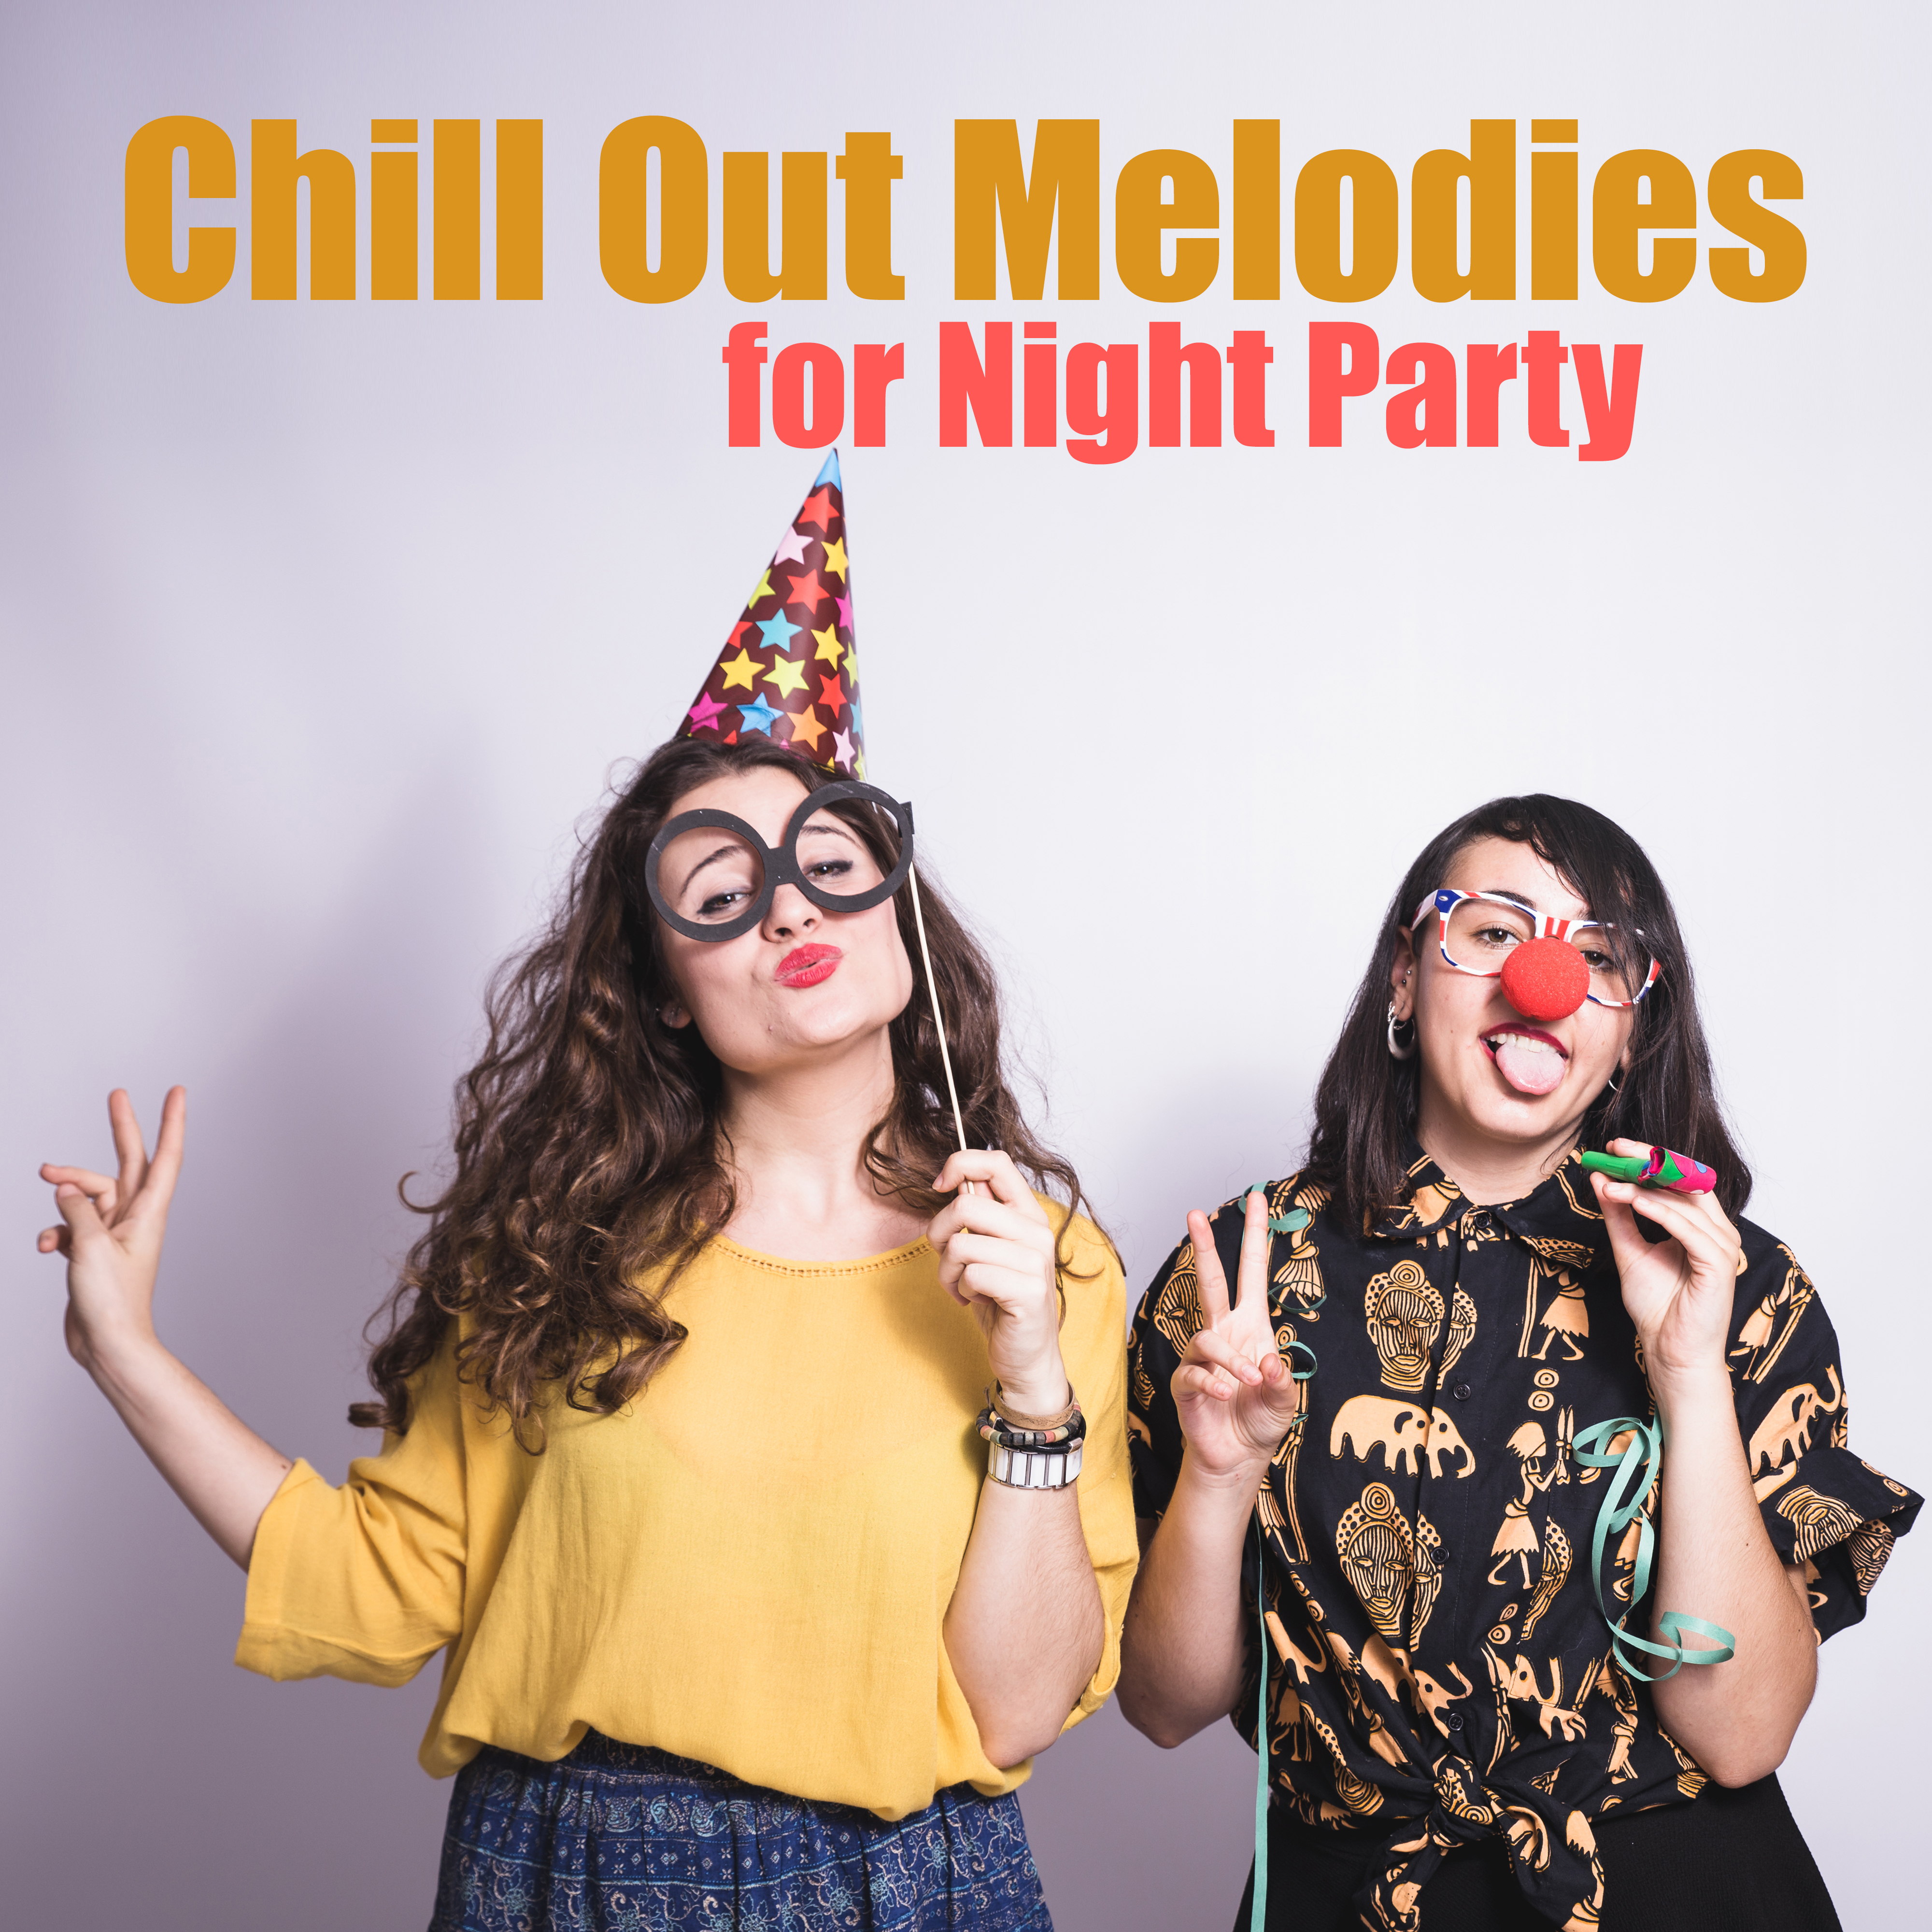 Chill Out Melodies for Night Party